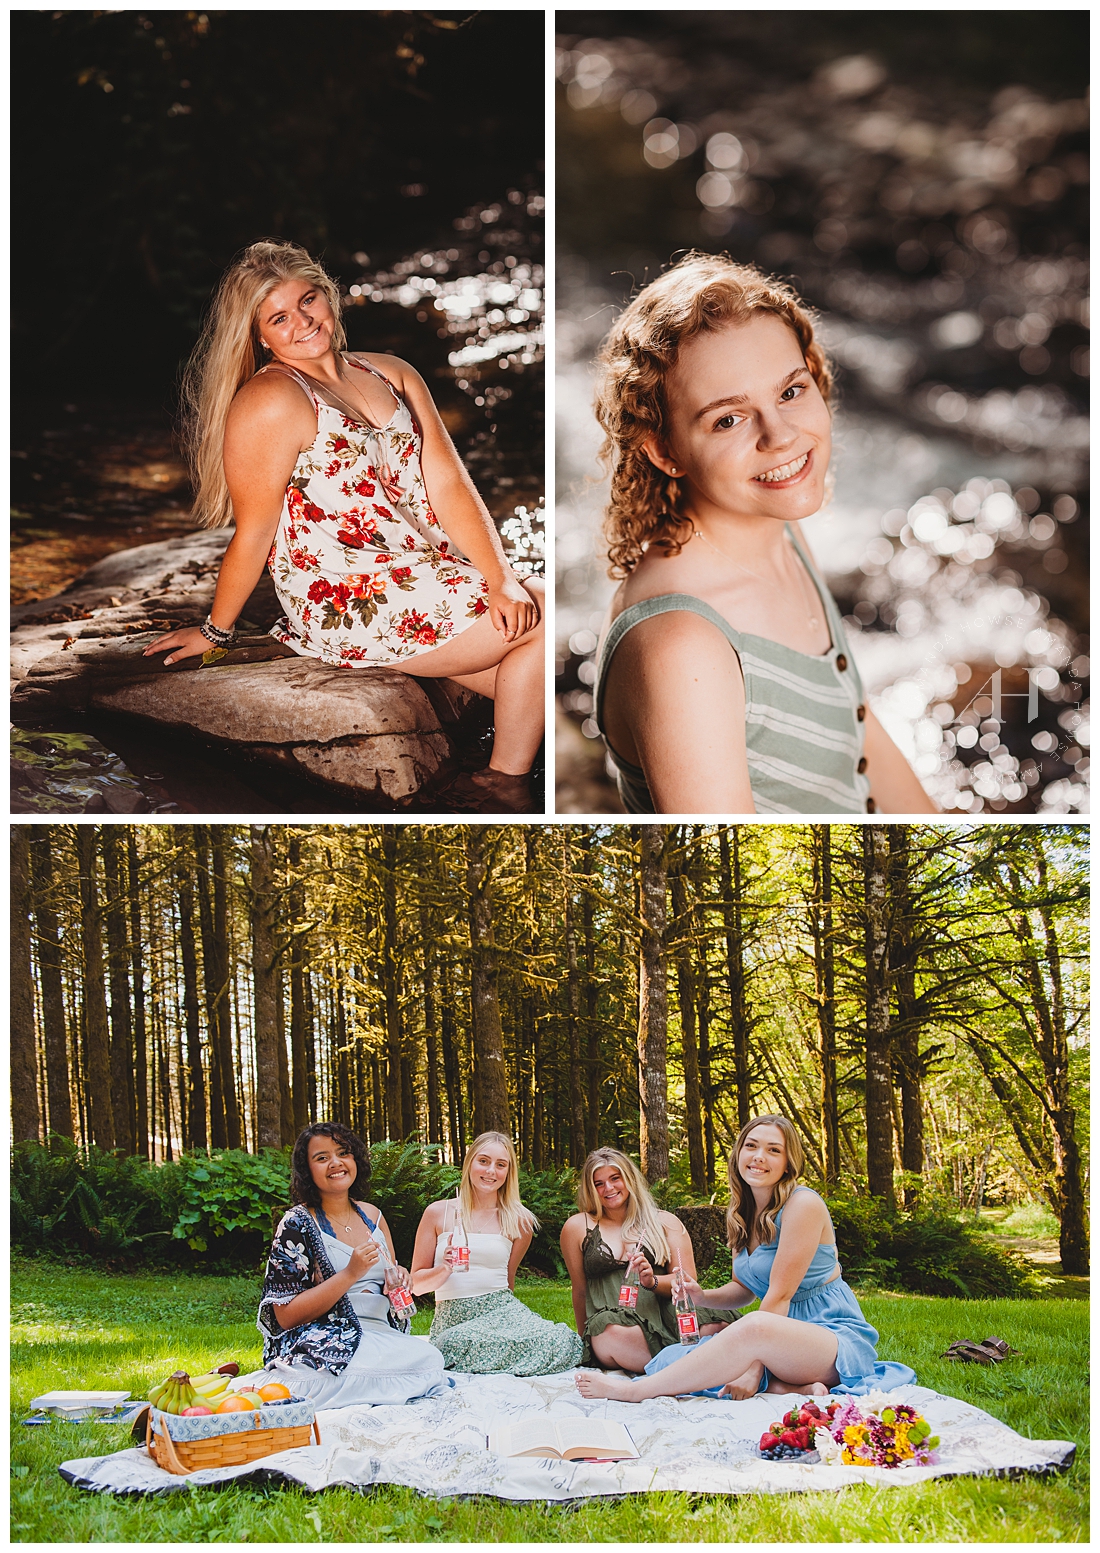 PNW Picnic Portraits by a River | AHP Model Team | Amanda Howse Photography